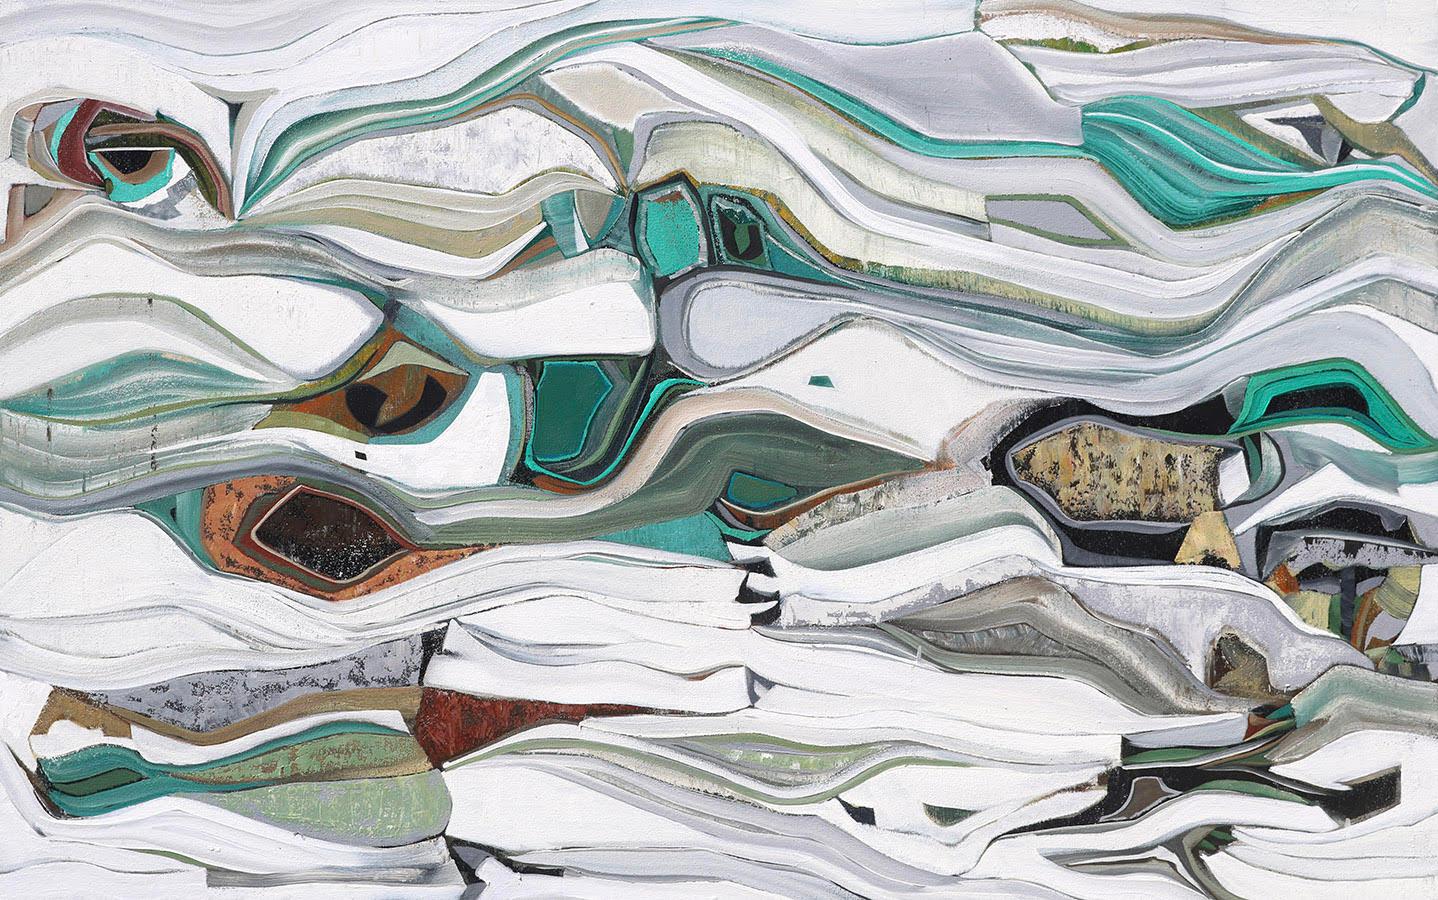 Chase Langford Abstract Painting - "Emerald Pass" abstract horizontal oil painting with turquoise, and gray shapes